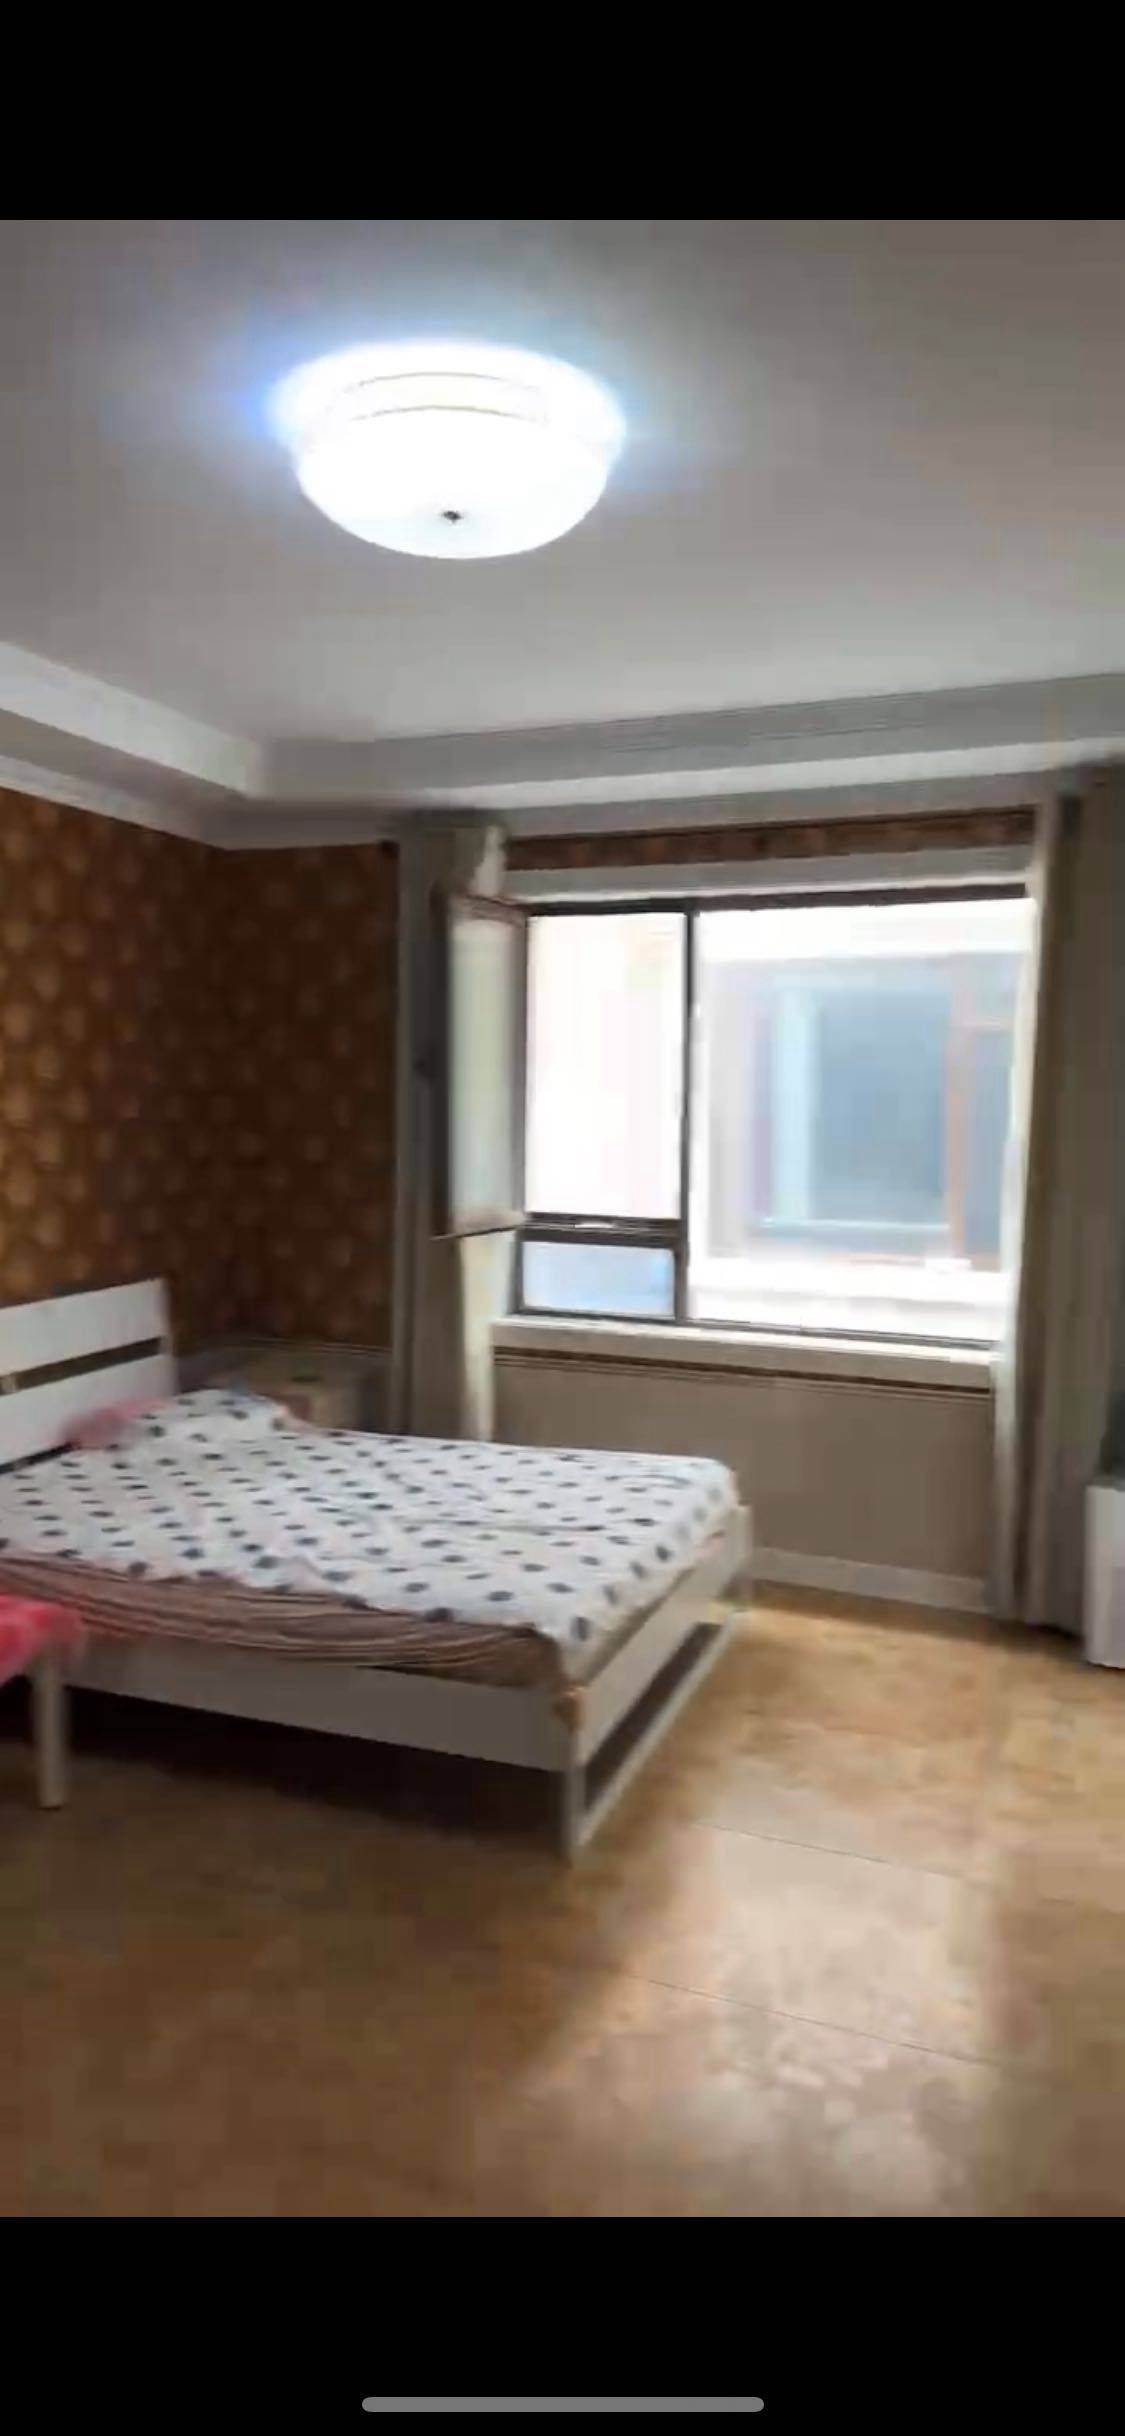 Beijing-Chaoyang-Cozy Home,Clean&Comfy,Hustle & Bustle,Chilled